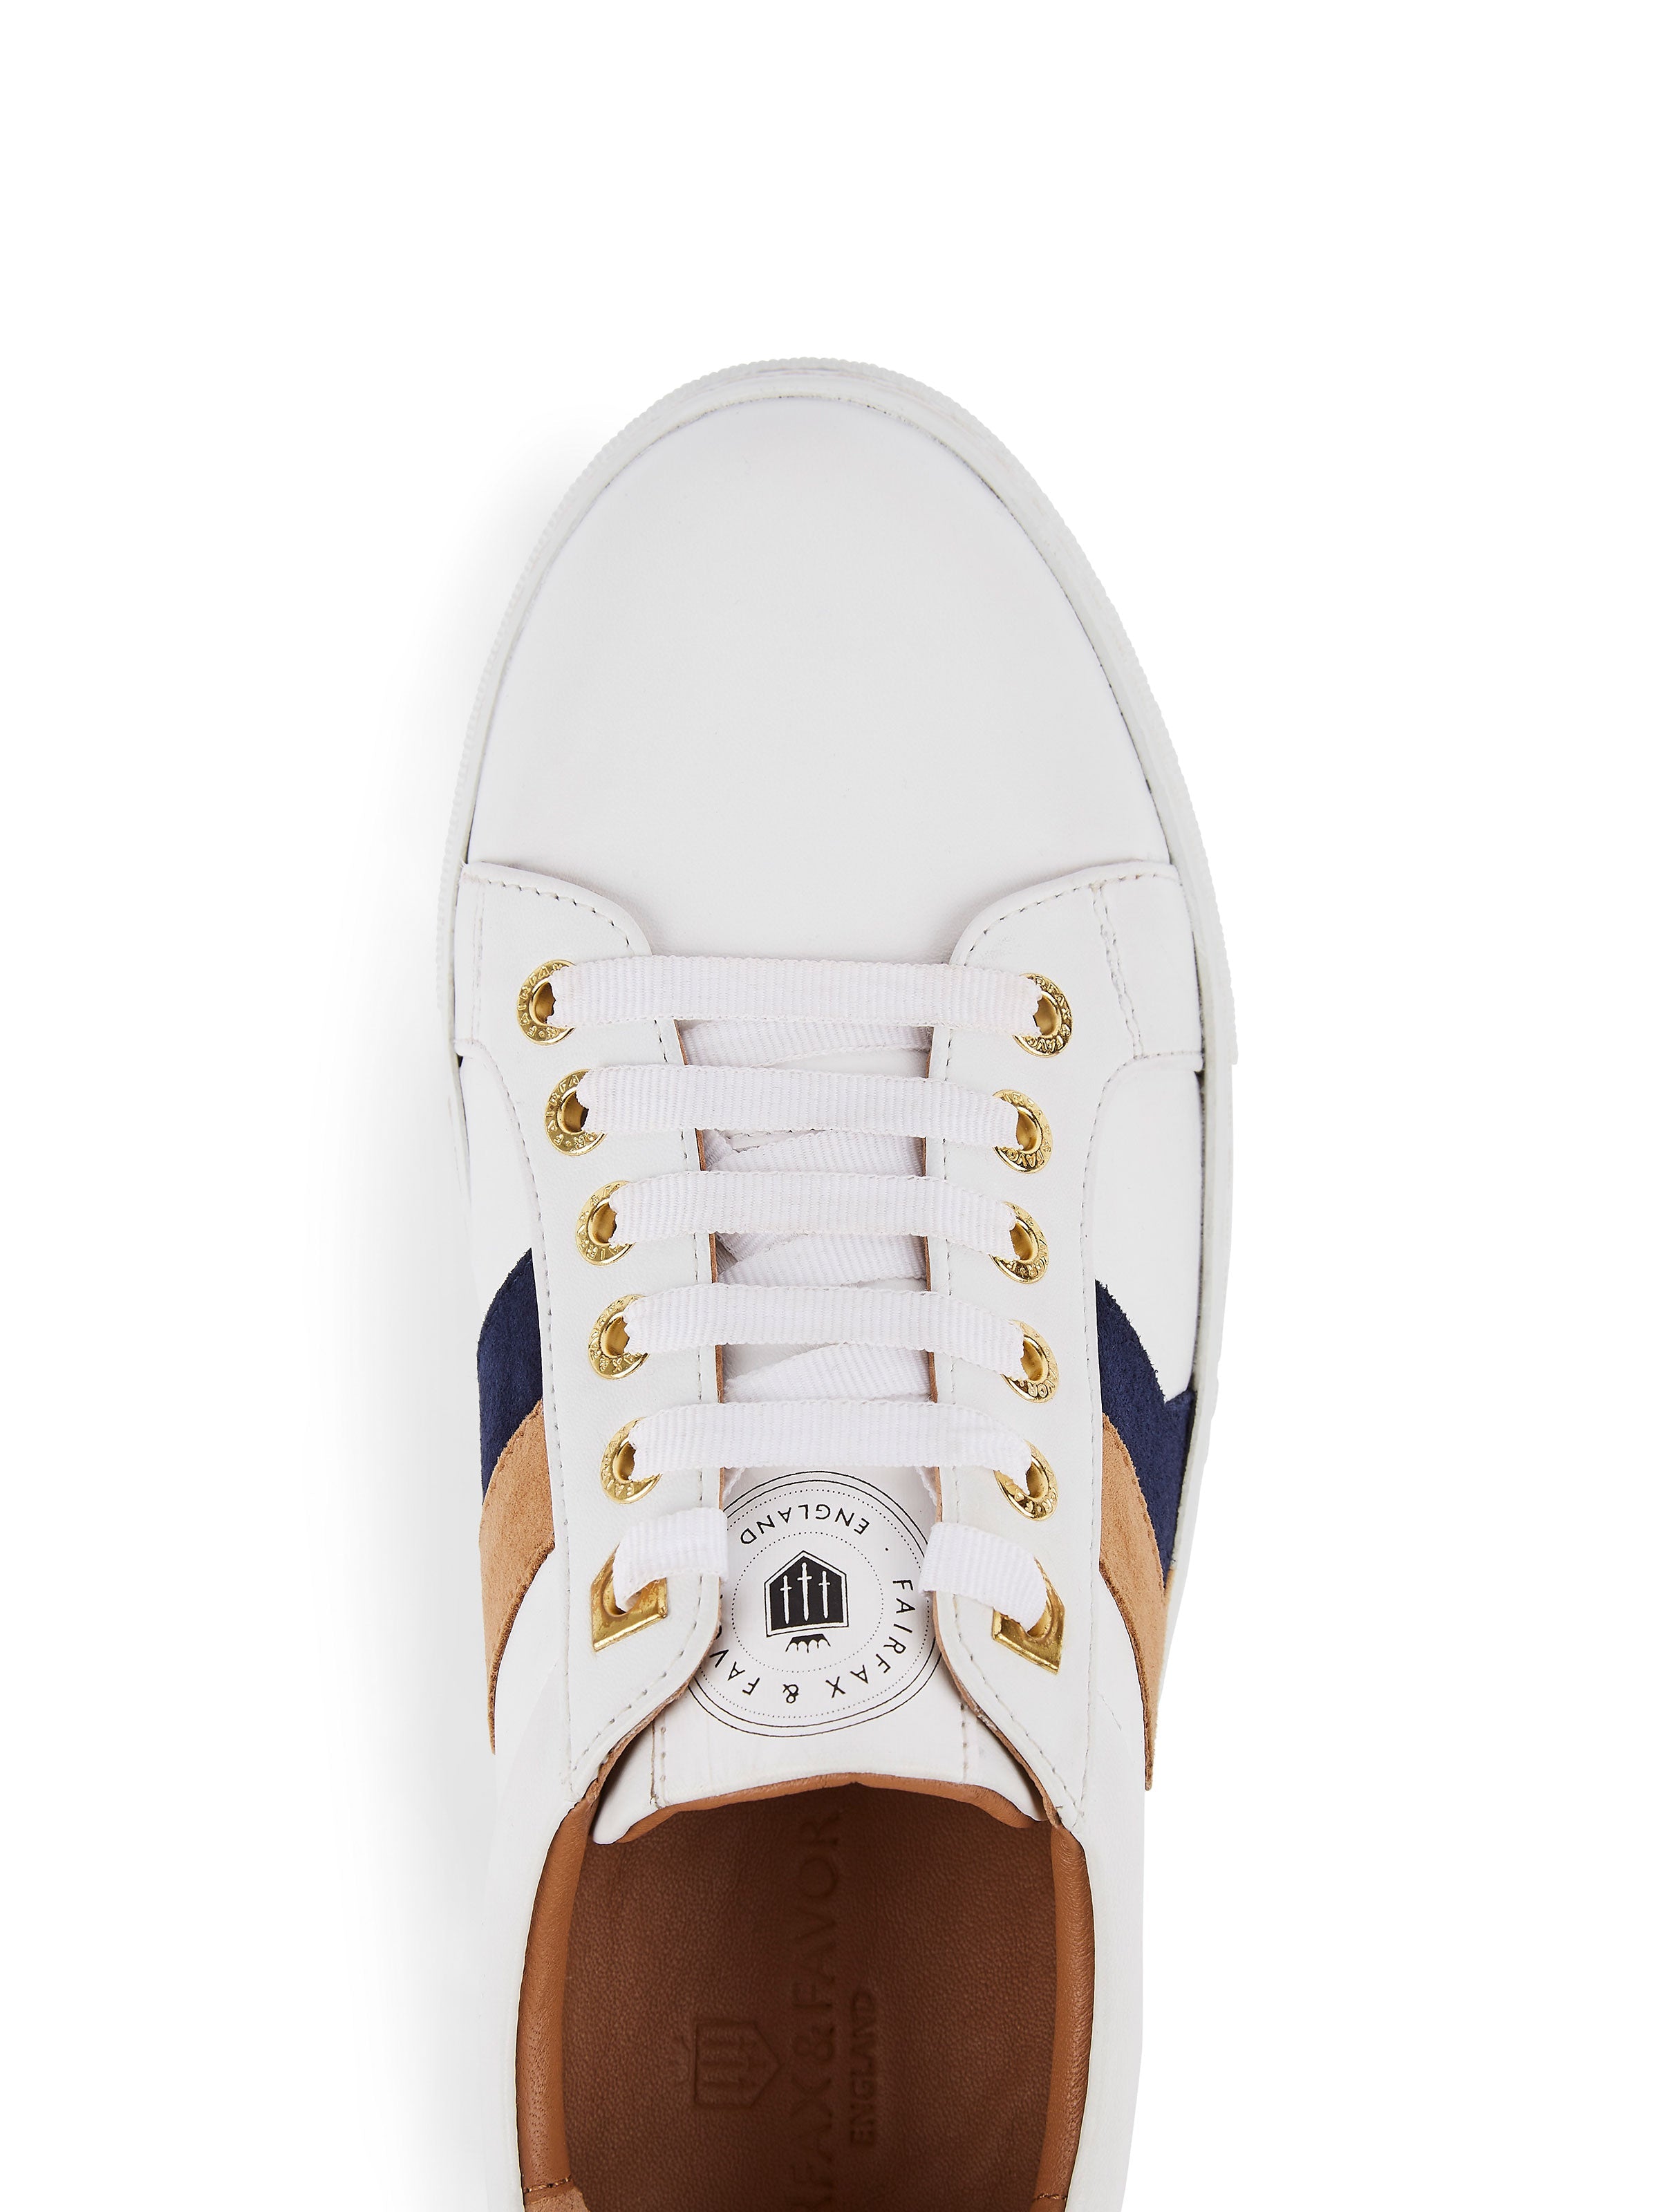 The Alexandra Trainer - Tan & Navy Suede